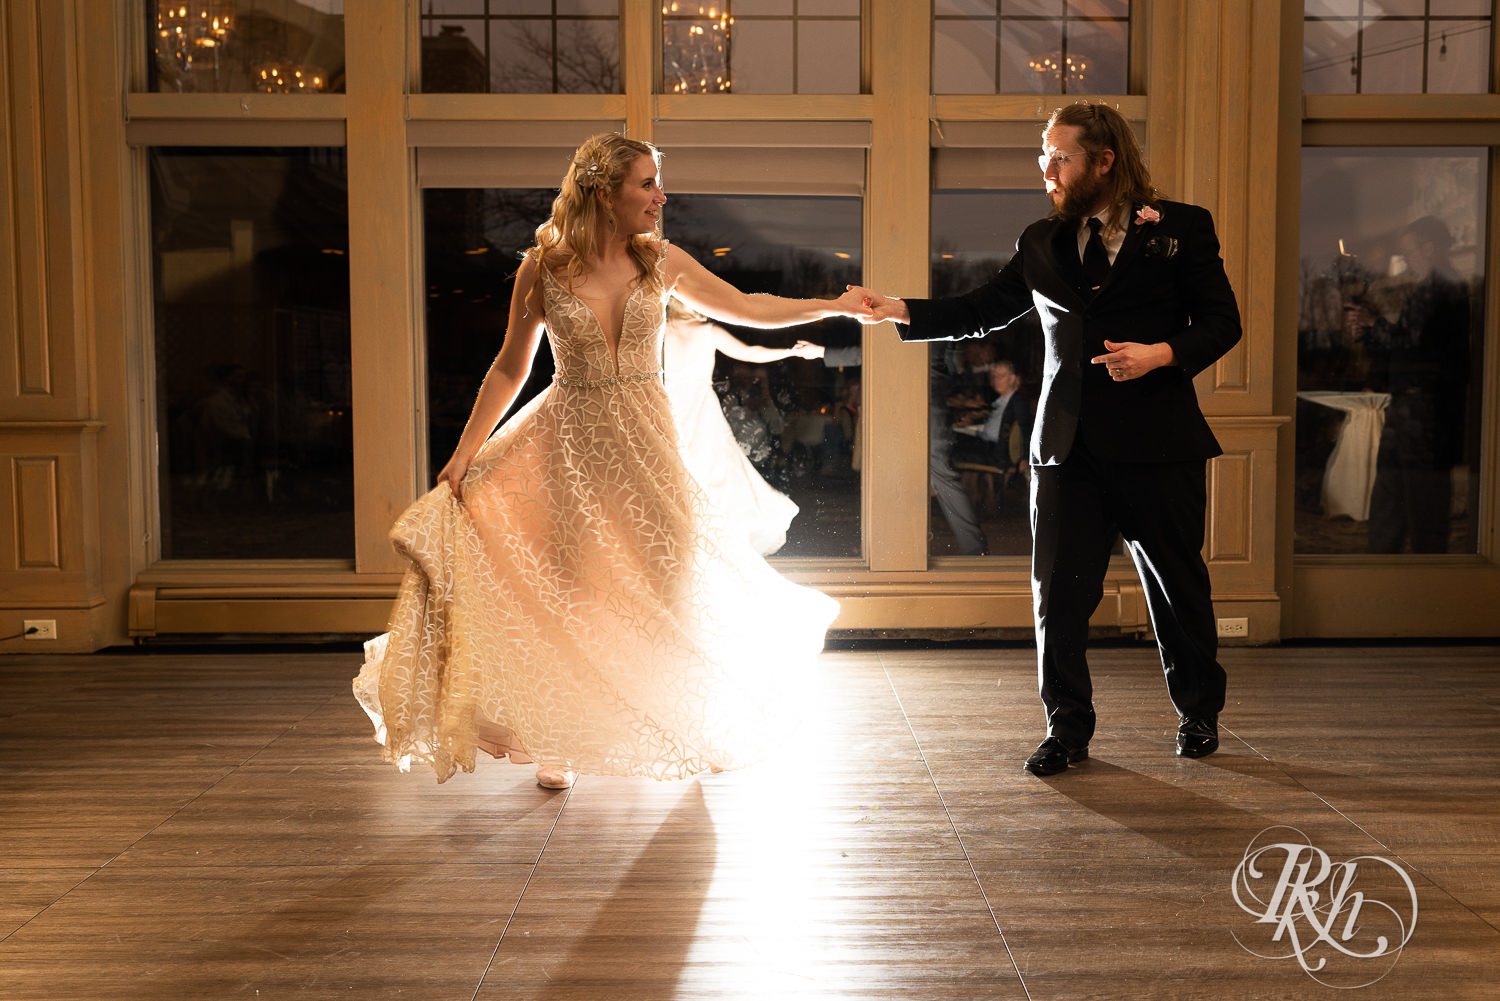 Bride and groom share first dance at Rush Creek Golf Club in Maple Grove, Minnesota.